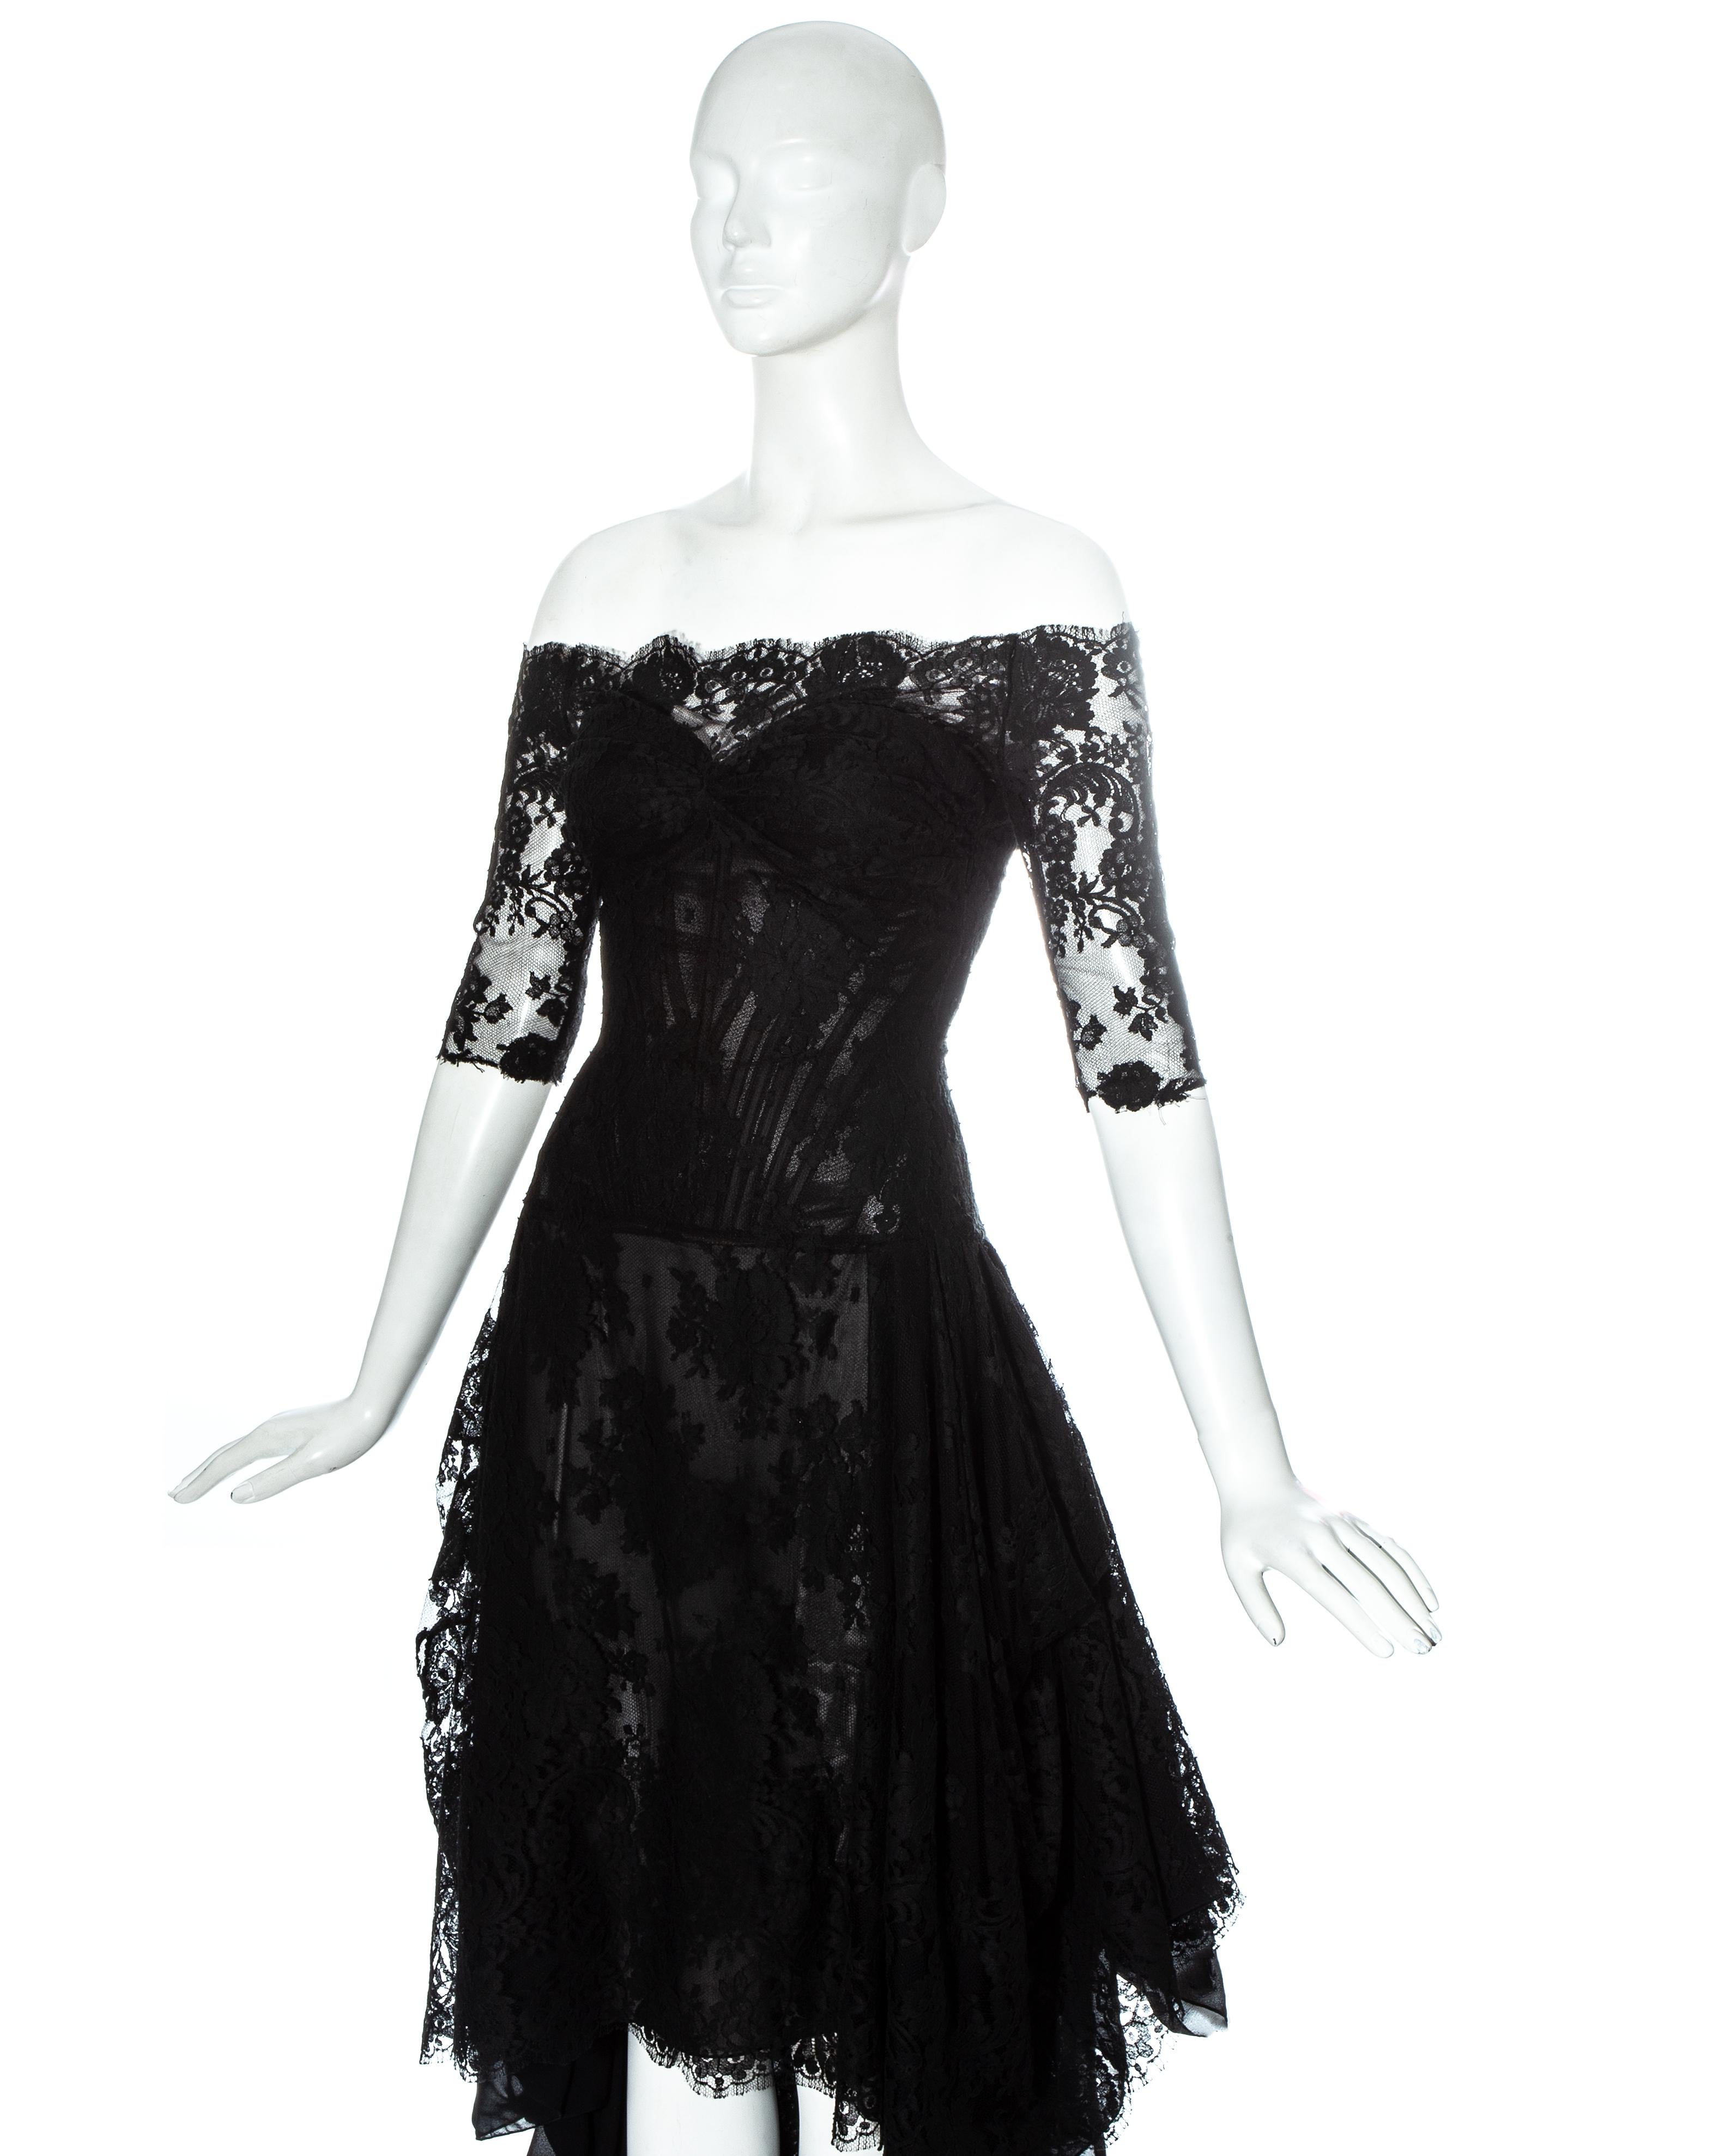 Alexander McQueen black lace corseted trained evening dress, 'Sarabande' ss 2007 1